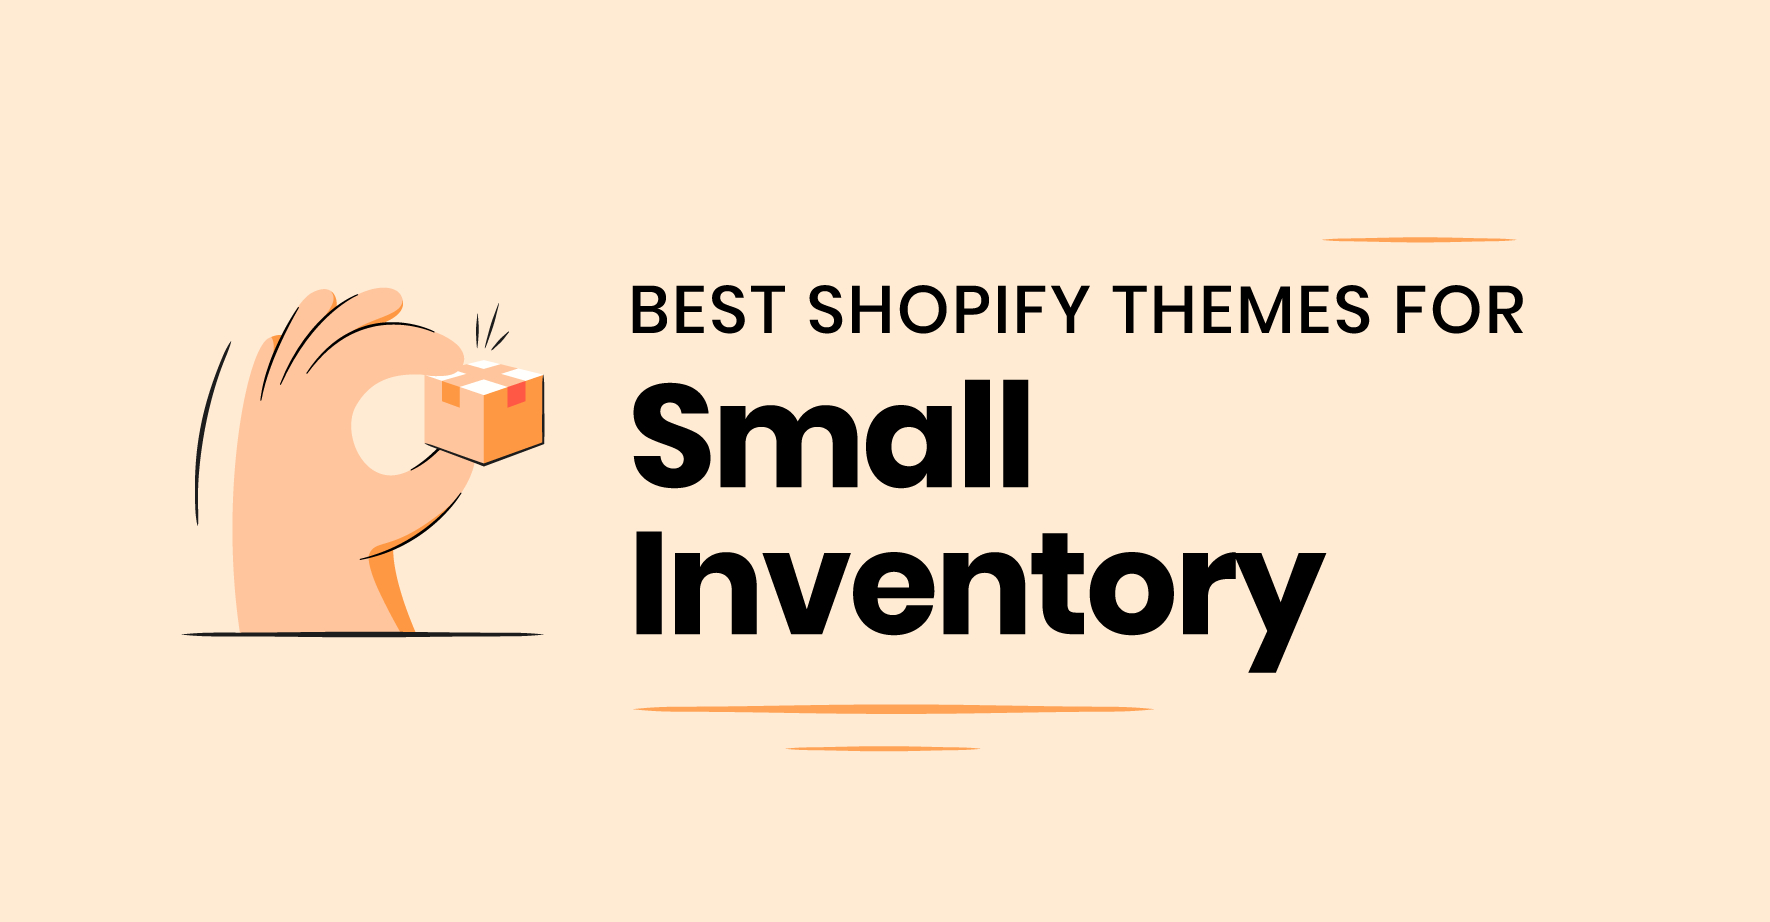 Best Shopify themes for small inventory